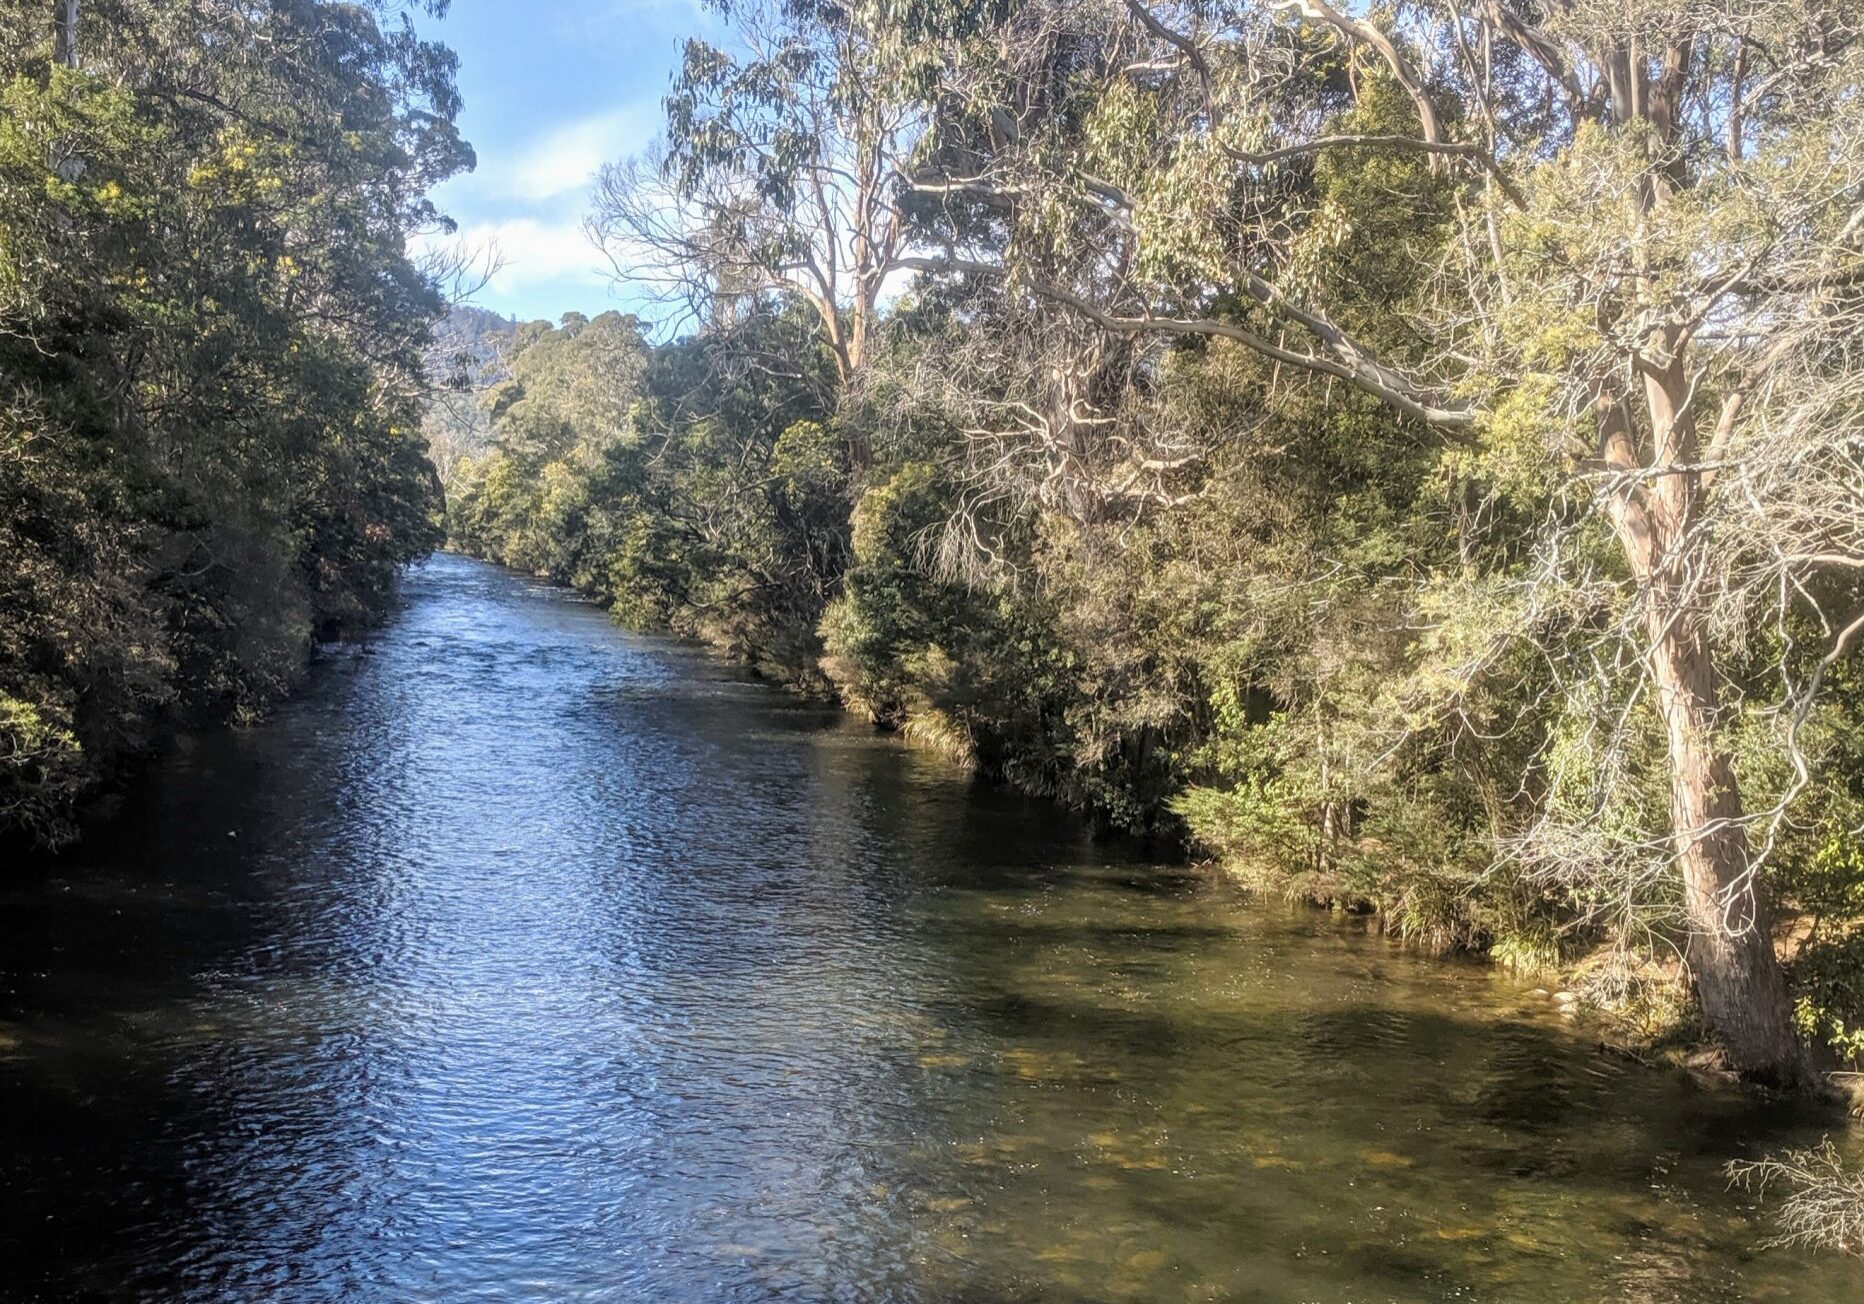 The Meander River - Upstream from Deloraine